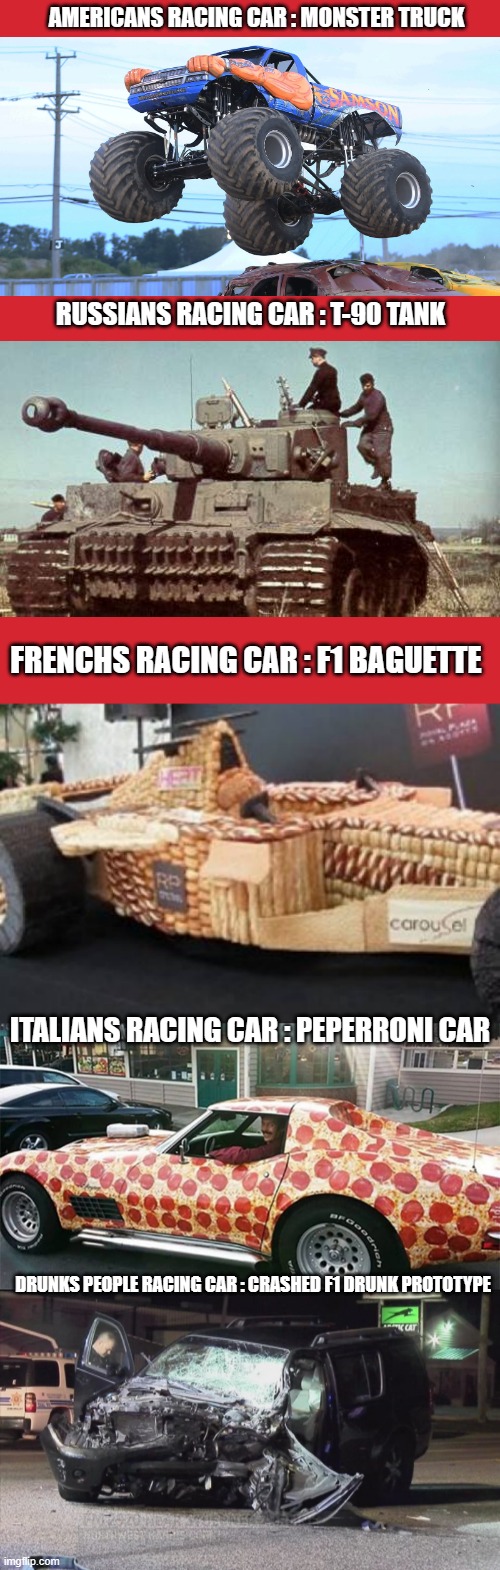 RACING CARS OF THIS WORLD | AMERICANS RACING CAR : MONSTER TRUCK; RUSSIANS RACING CAR : T-90 TANK; FRENCHS RACING CAR : F1 BAGUETTE; ITALIANS RACING CAR : PEPERRONI CAR; DRUNKS PEOPLE RACING CAR : CRASHED F1 DRUNK PROTOTYPE | image tagged in memes,racing,cars,country,lol,xd | made w/ Imgflip meme maker